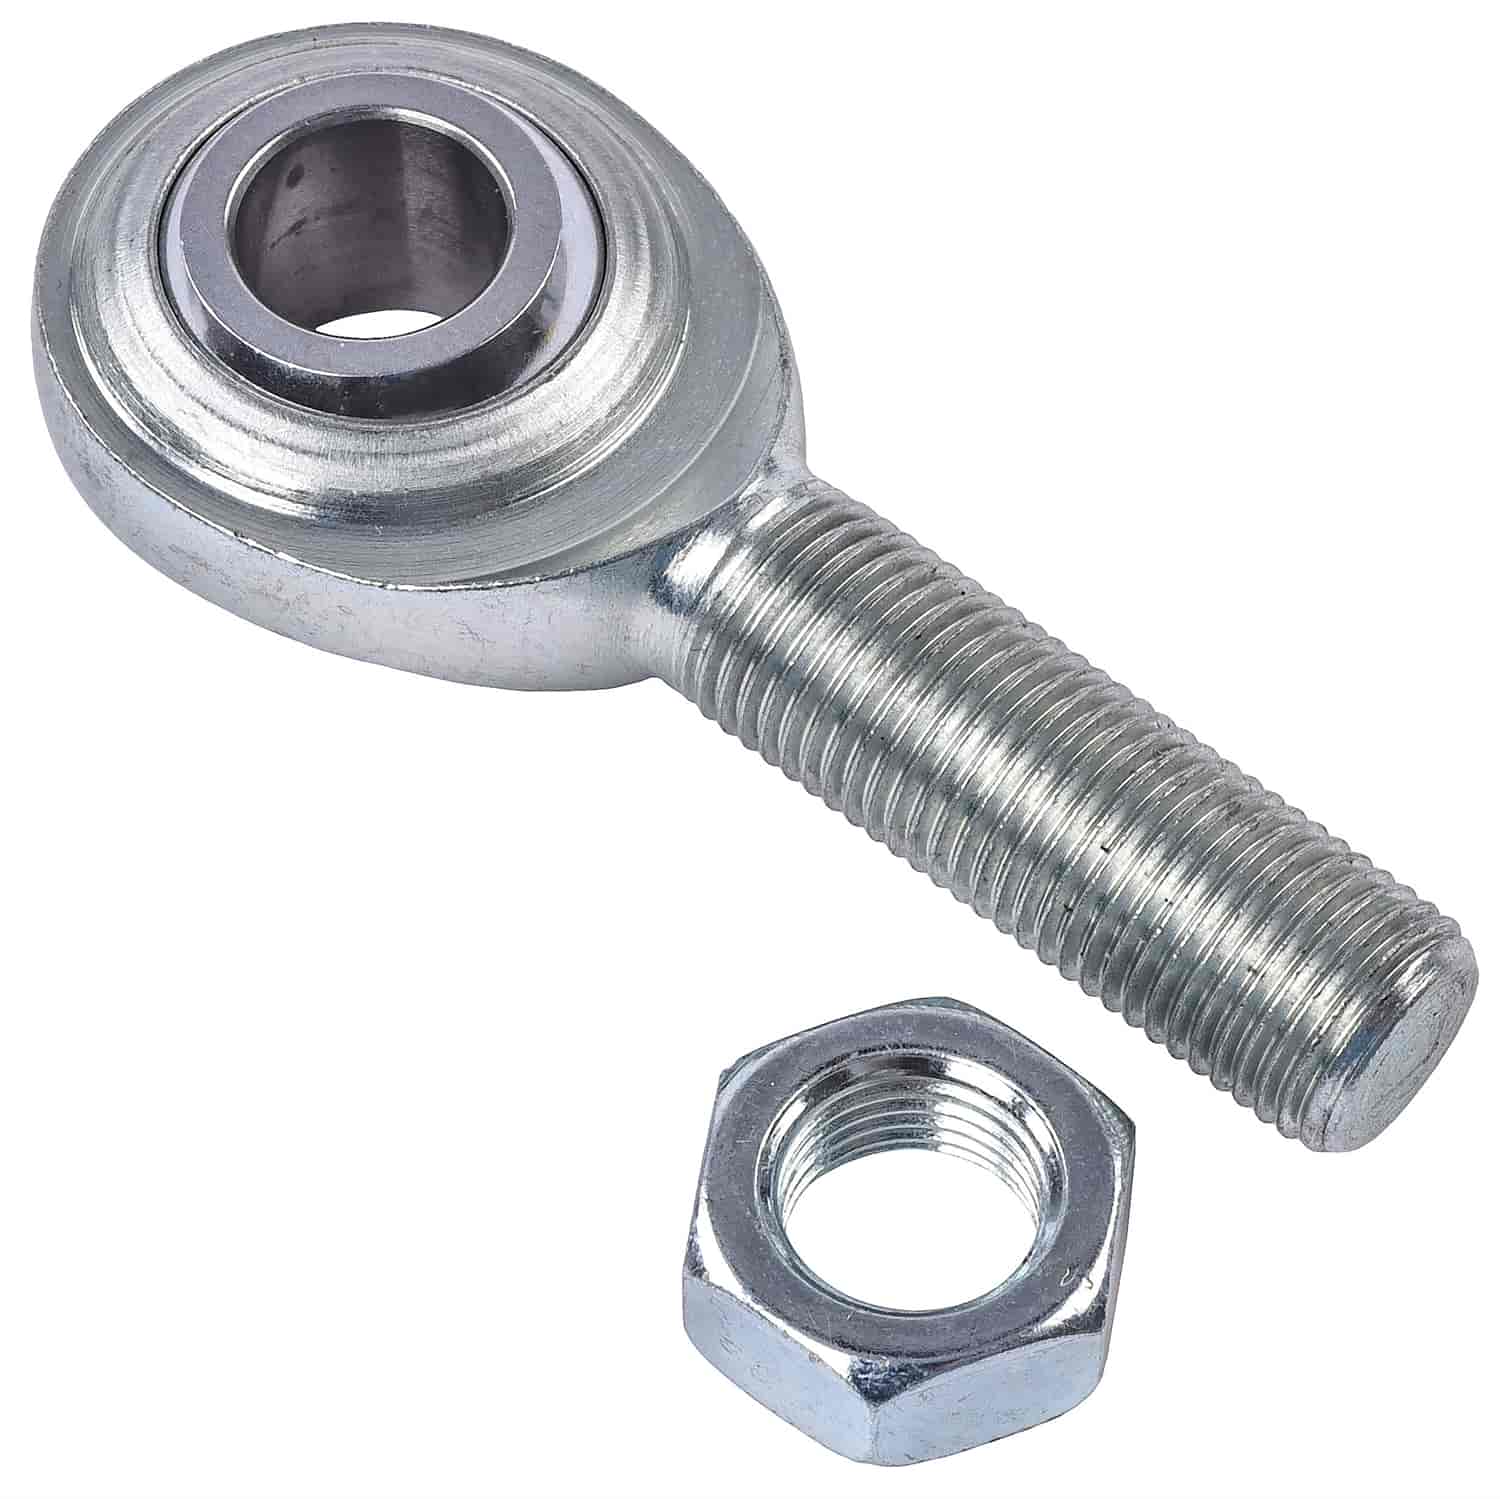 Two-Piece Rod End with Jam Nut 1/2" Hole